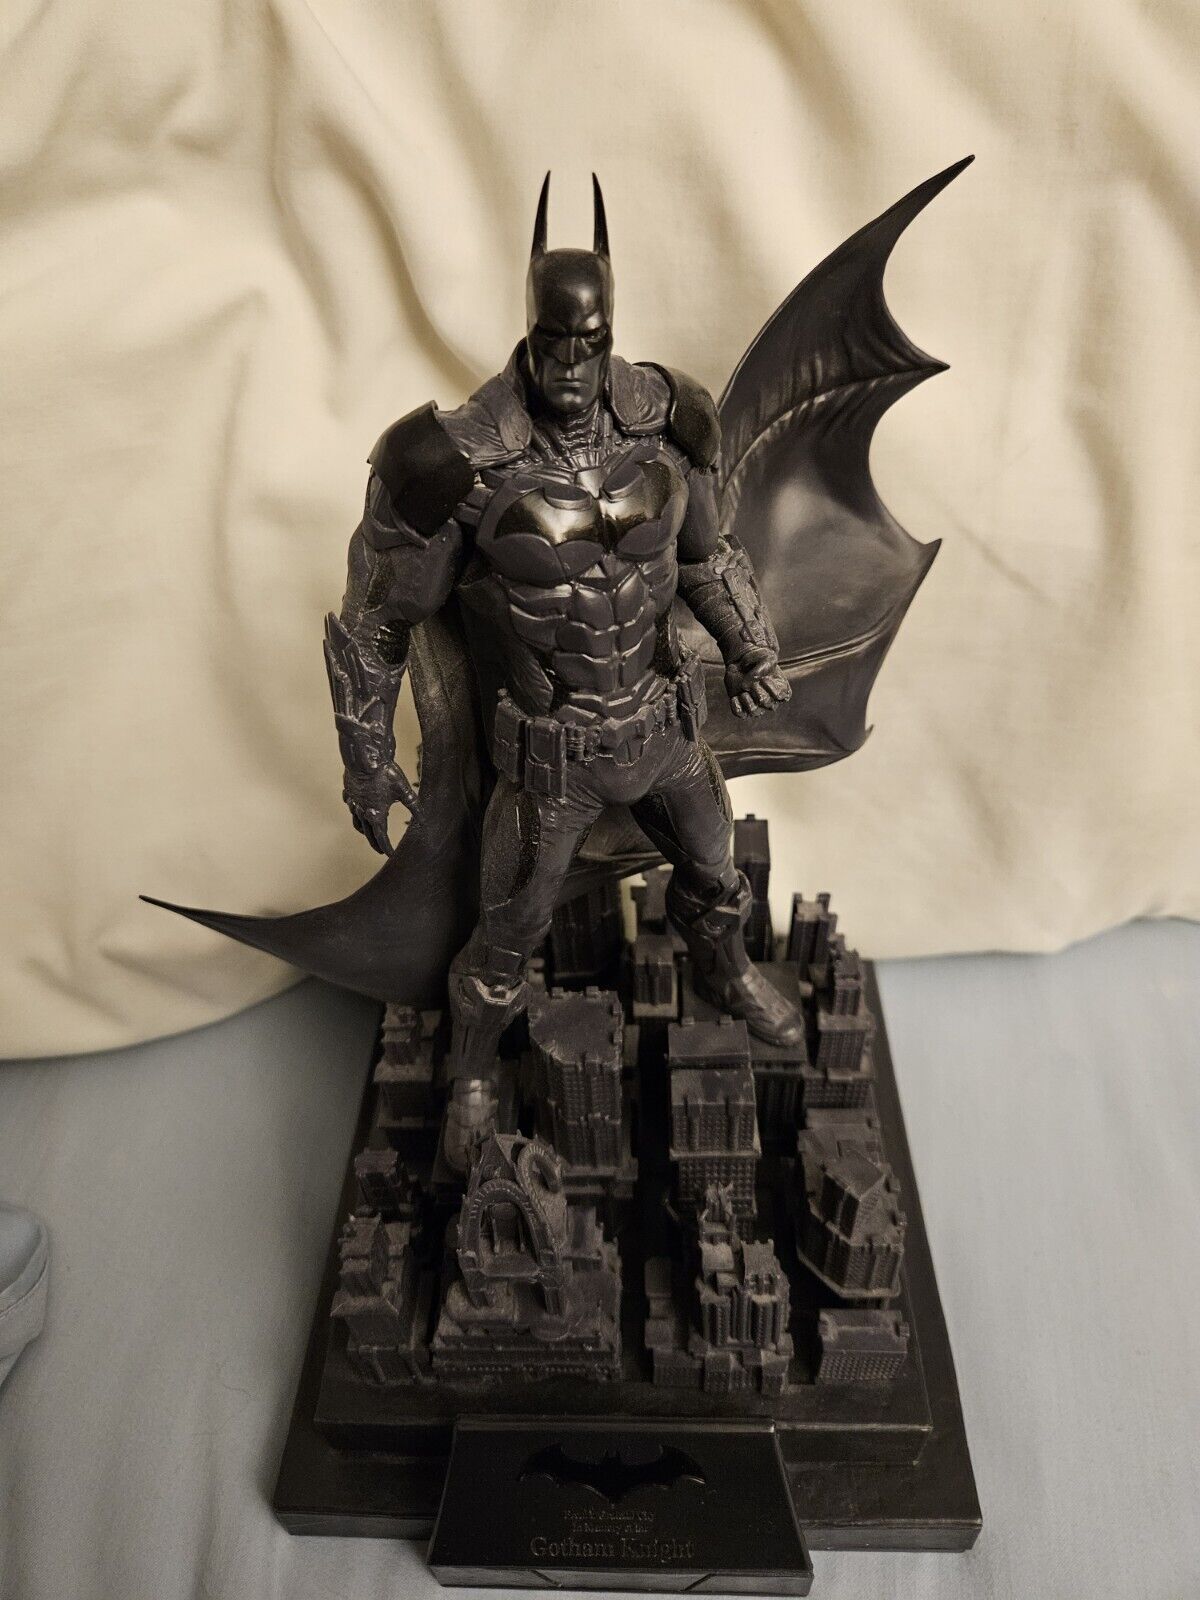 Batman Arkham Knight Collectors Edition Light-up Statue. STATUE ONLY